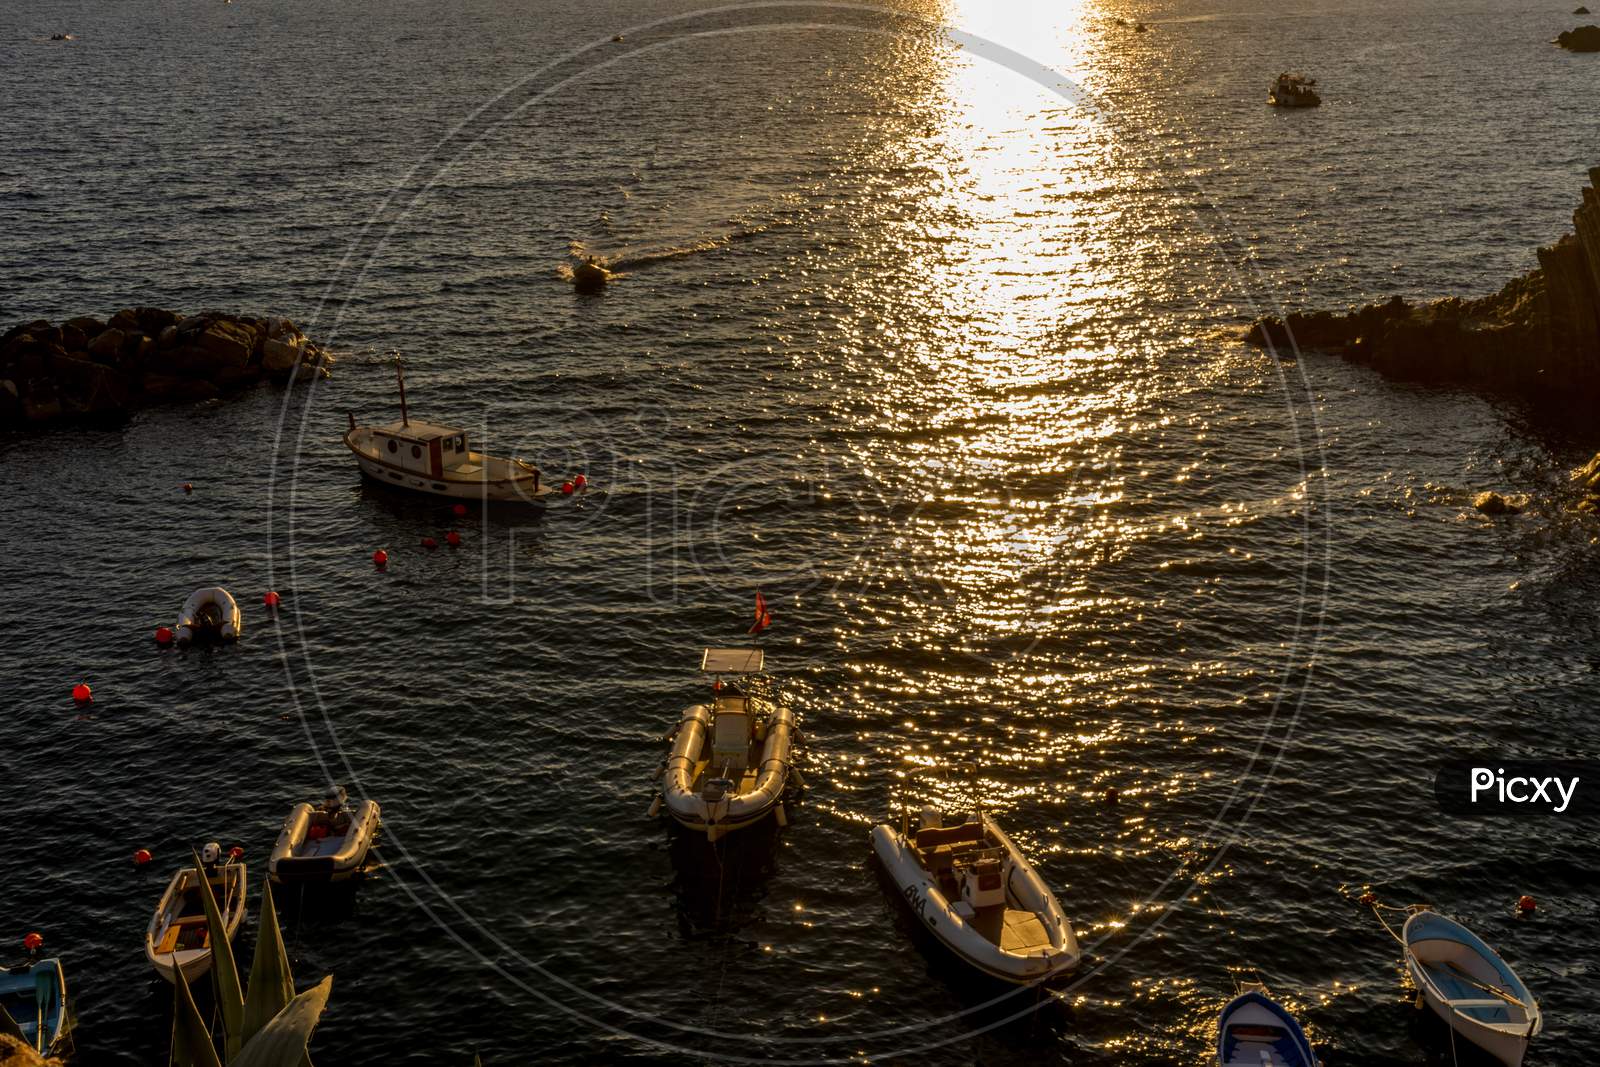 Riomaggiore, Cinque Terre, Italy - 26 June 2018: Boats And Yachts On The Ocean During Sunset, Italian Riviera Of Riomaggiore, Cinque Terre, Italy